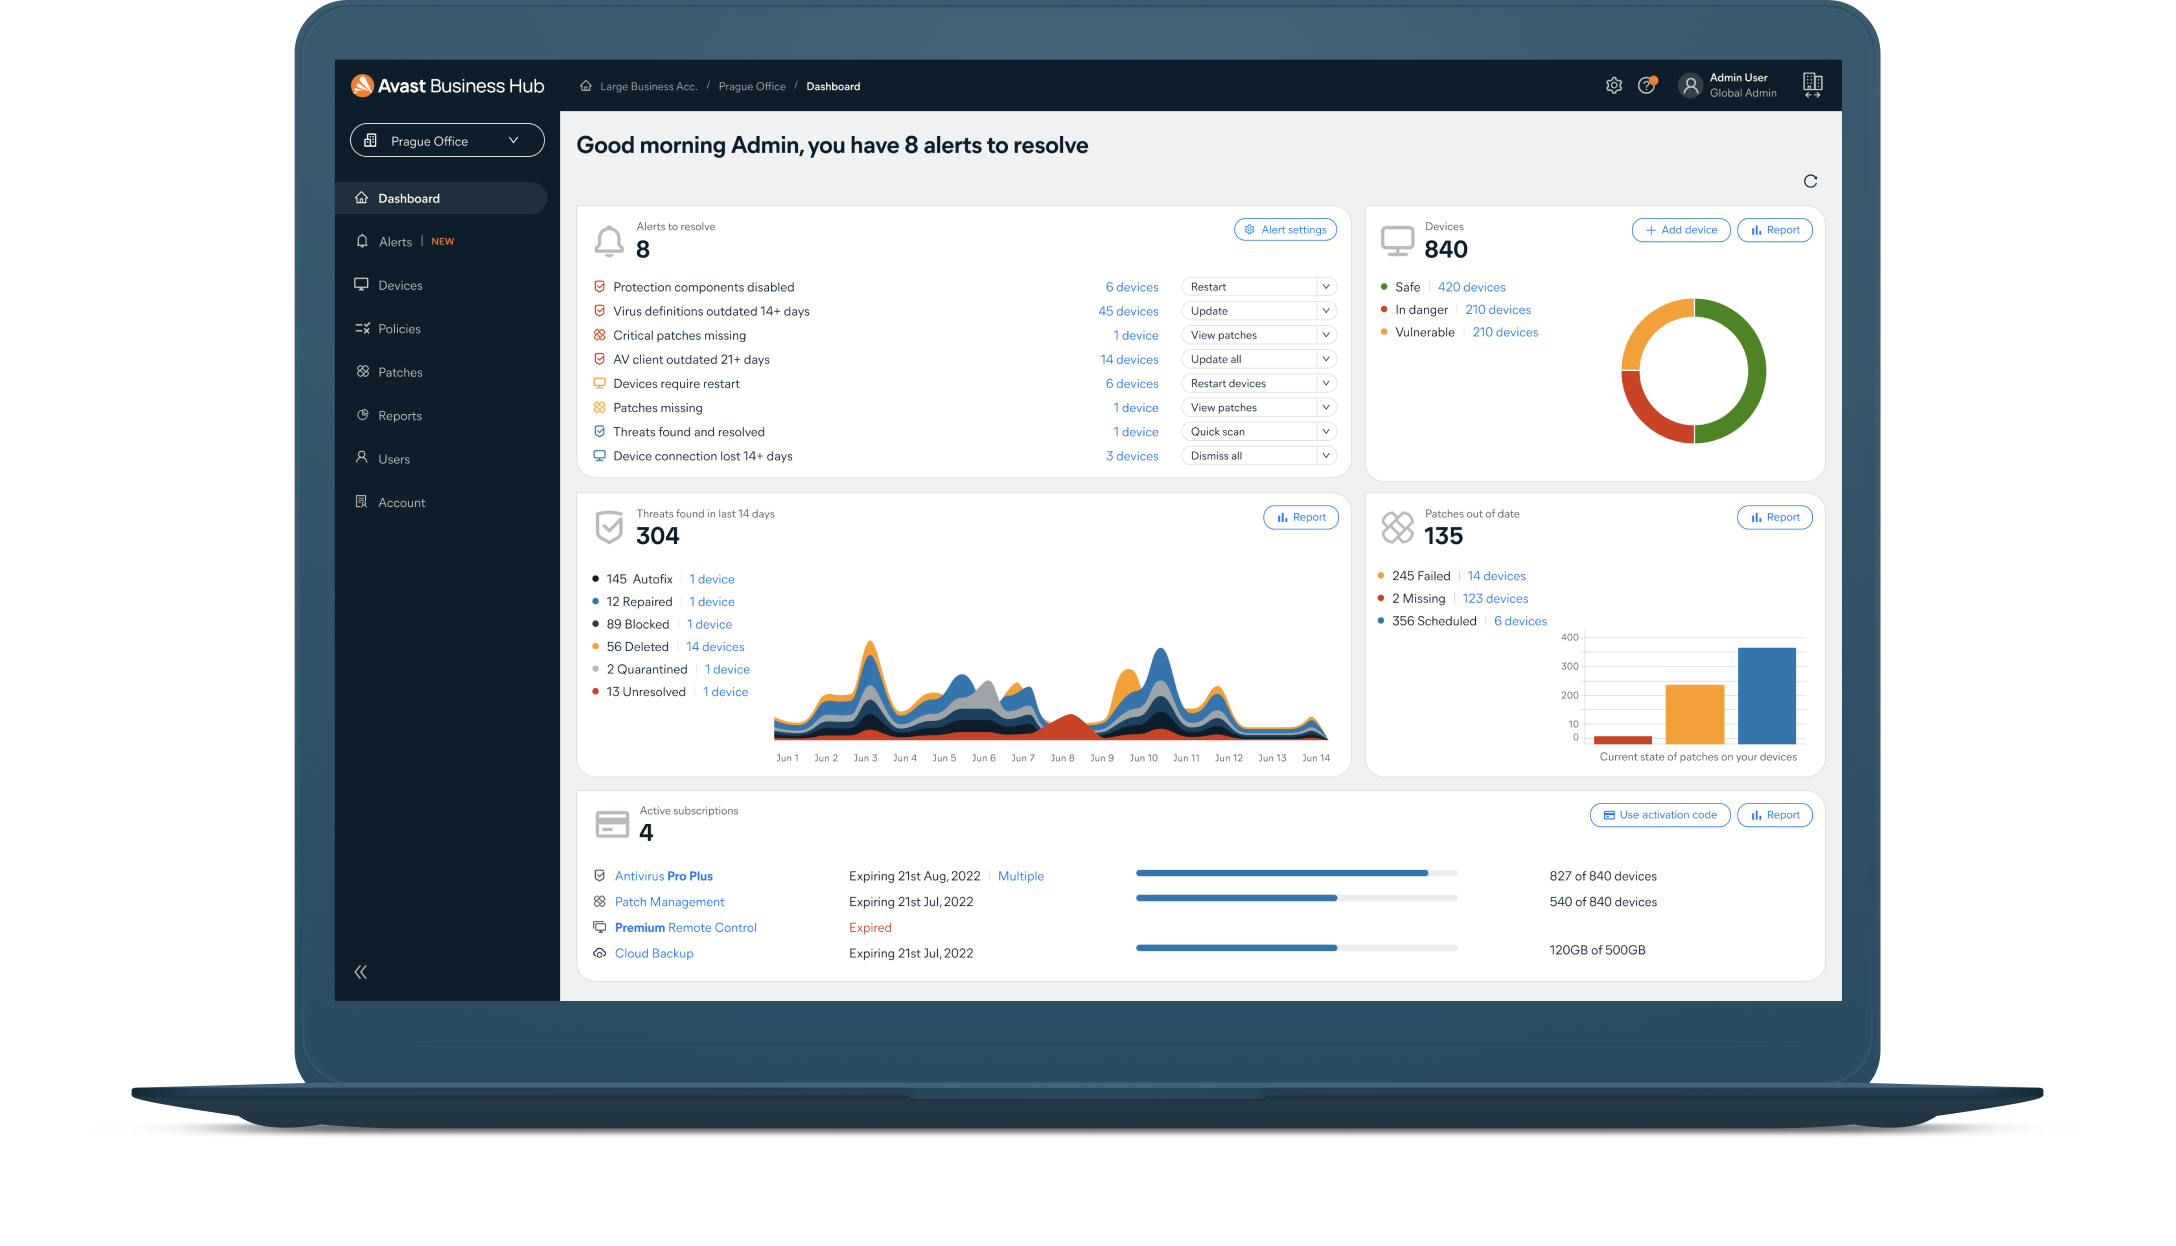 Easily manage all your Avast Business security solutions from one streamlined dashboard.